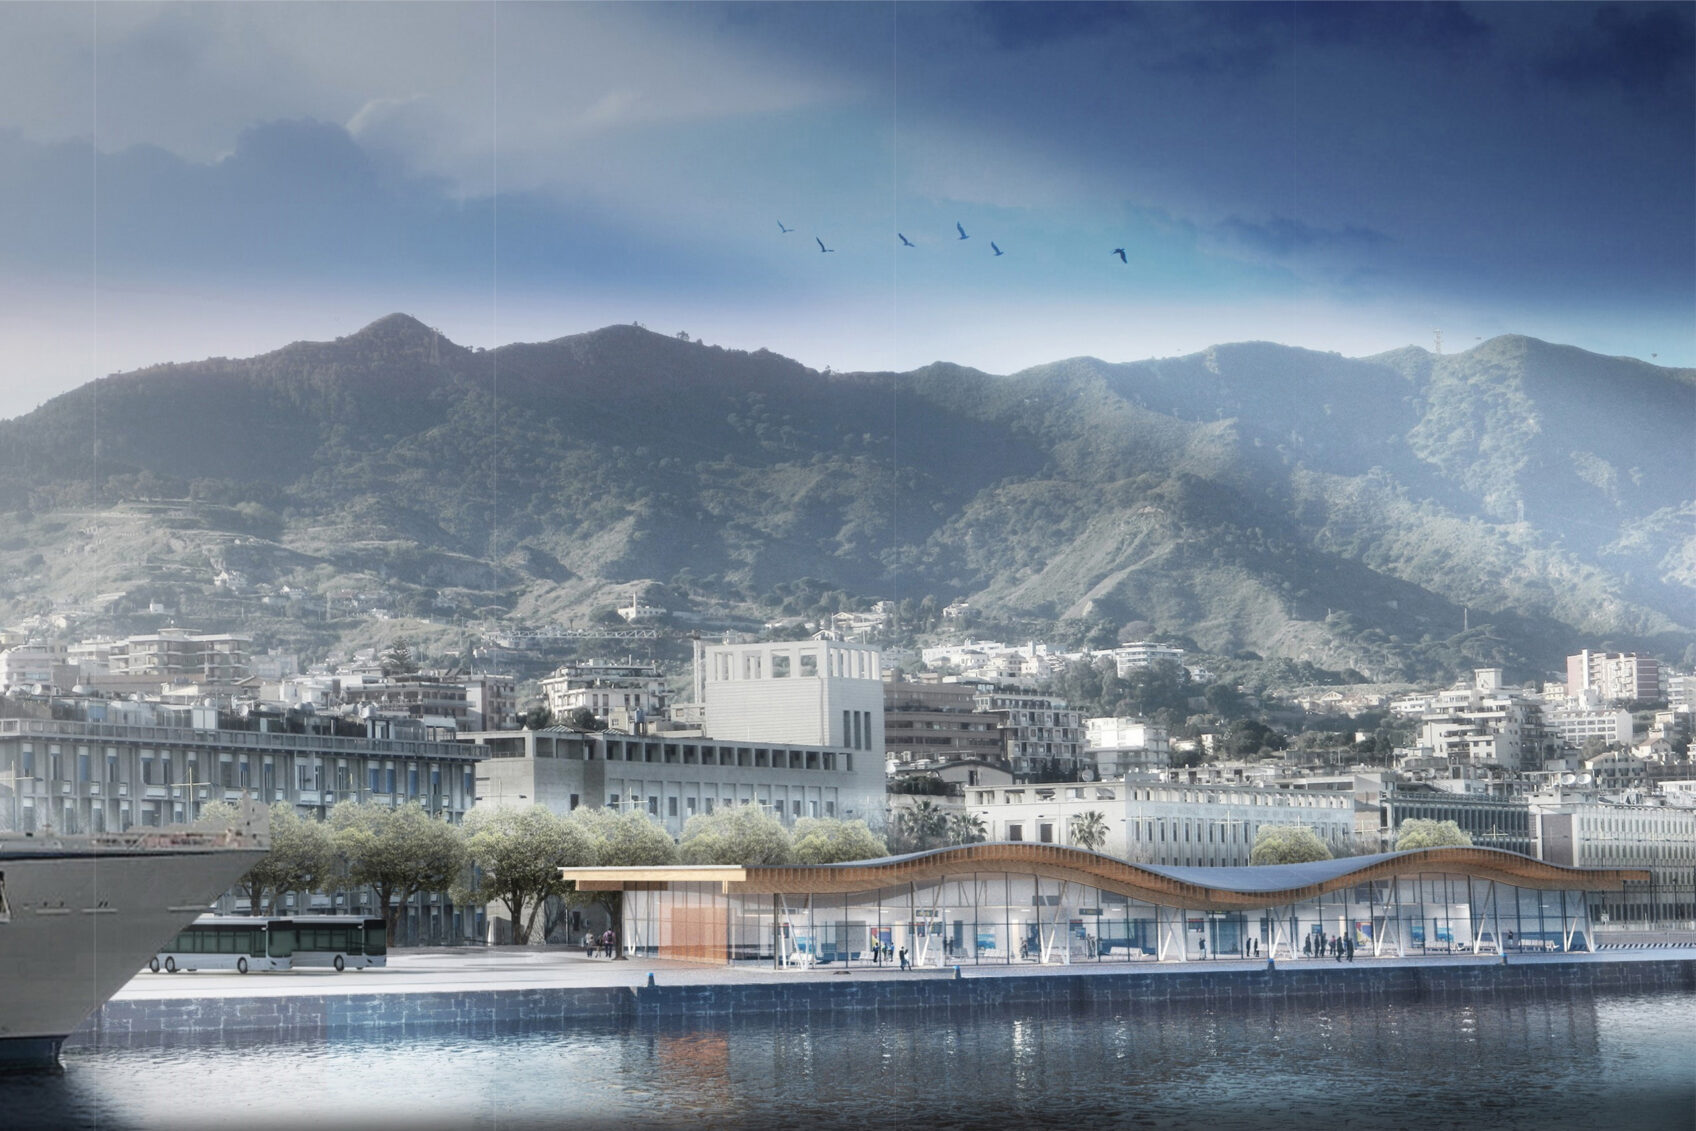 Render new passenger terminal at the Port of Messina as seen from the sea